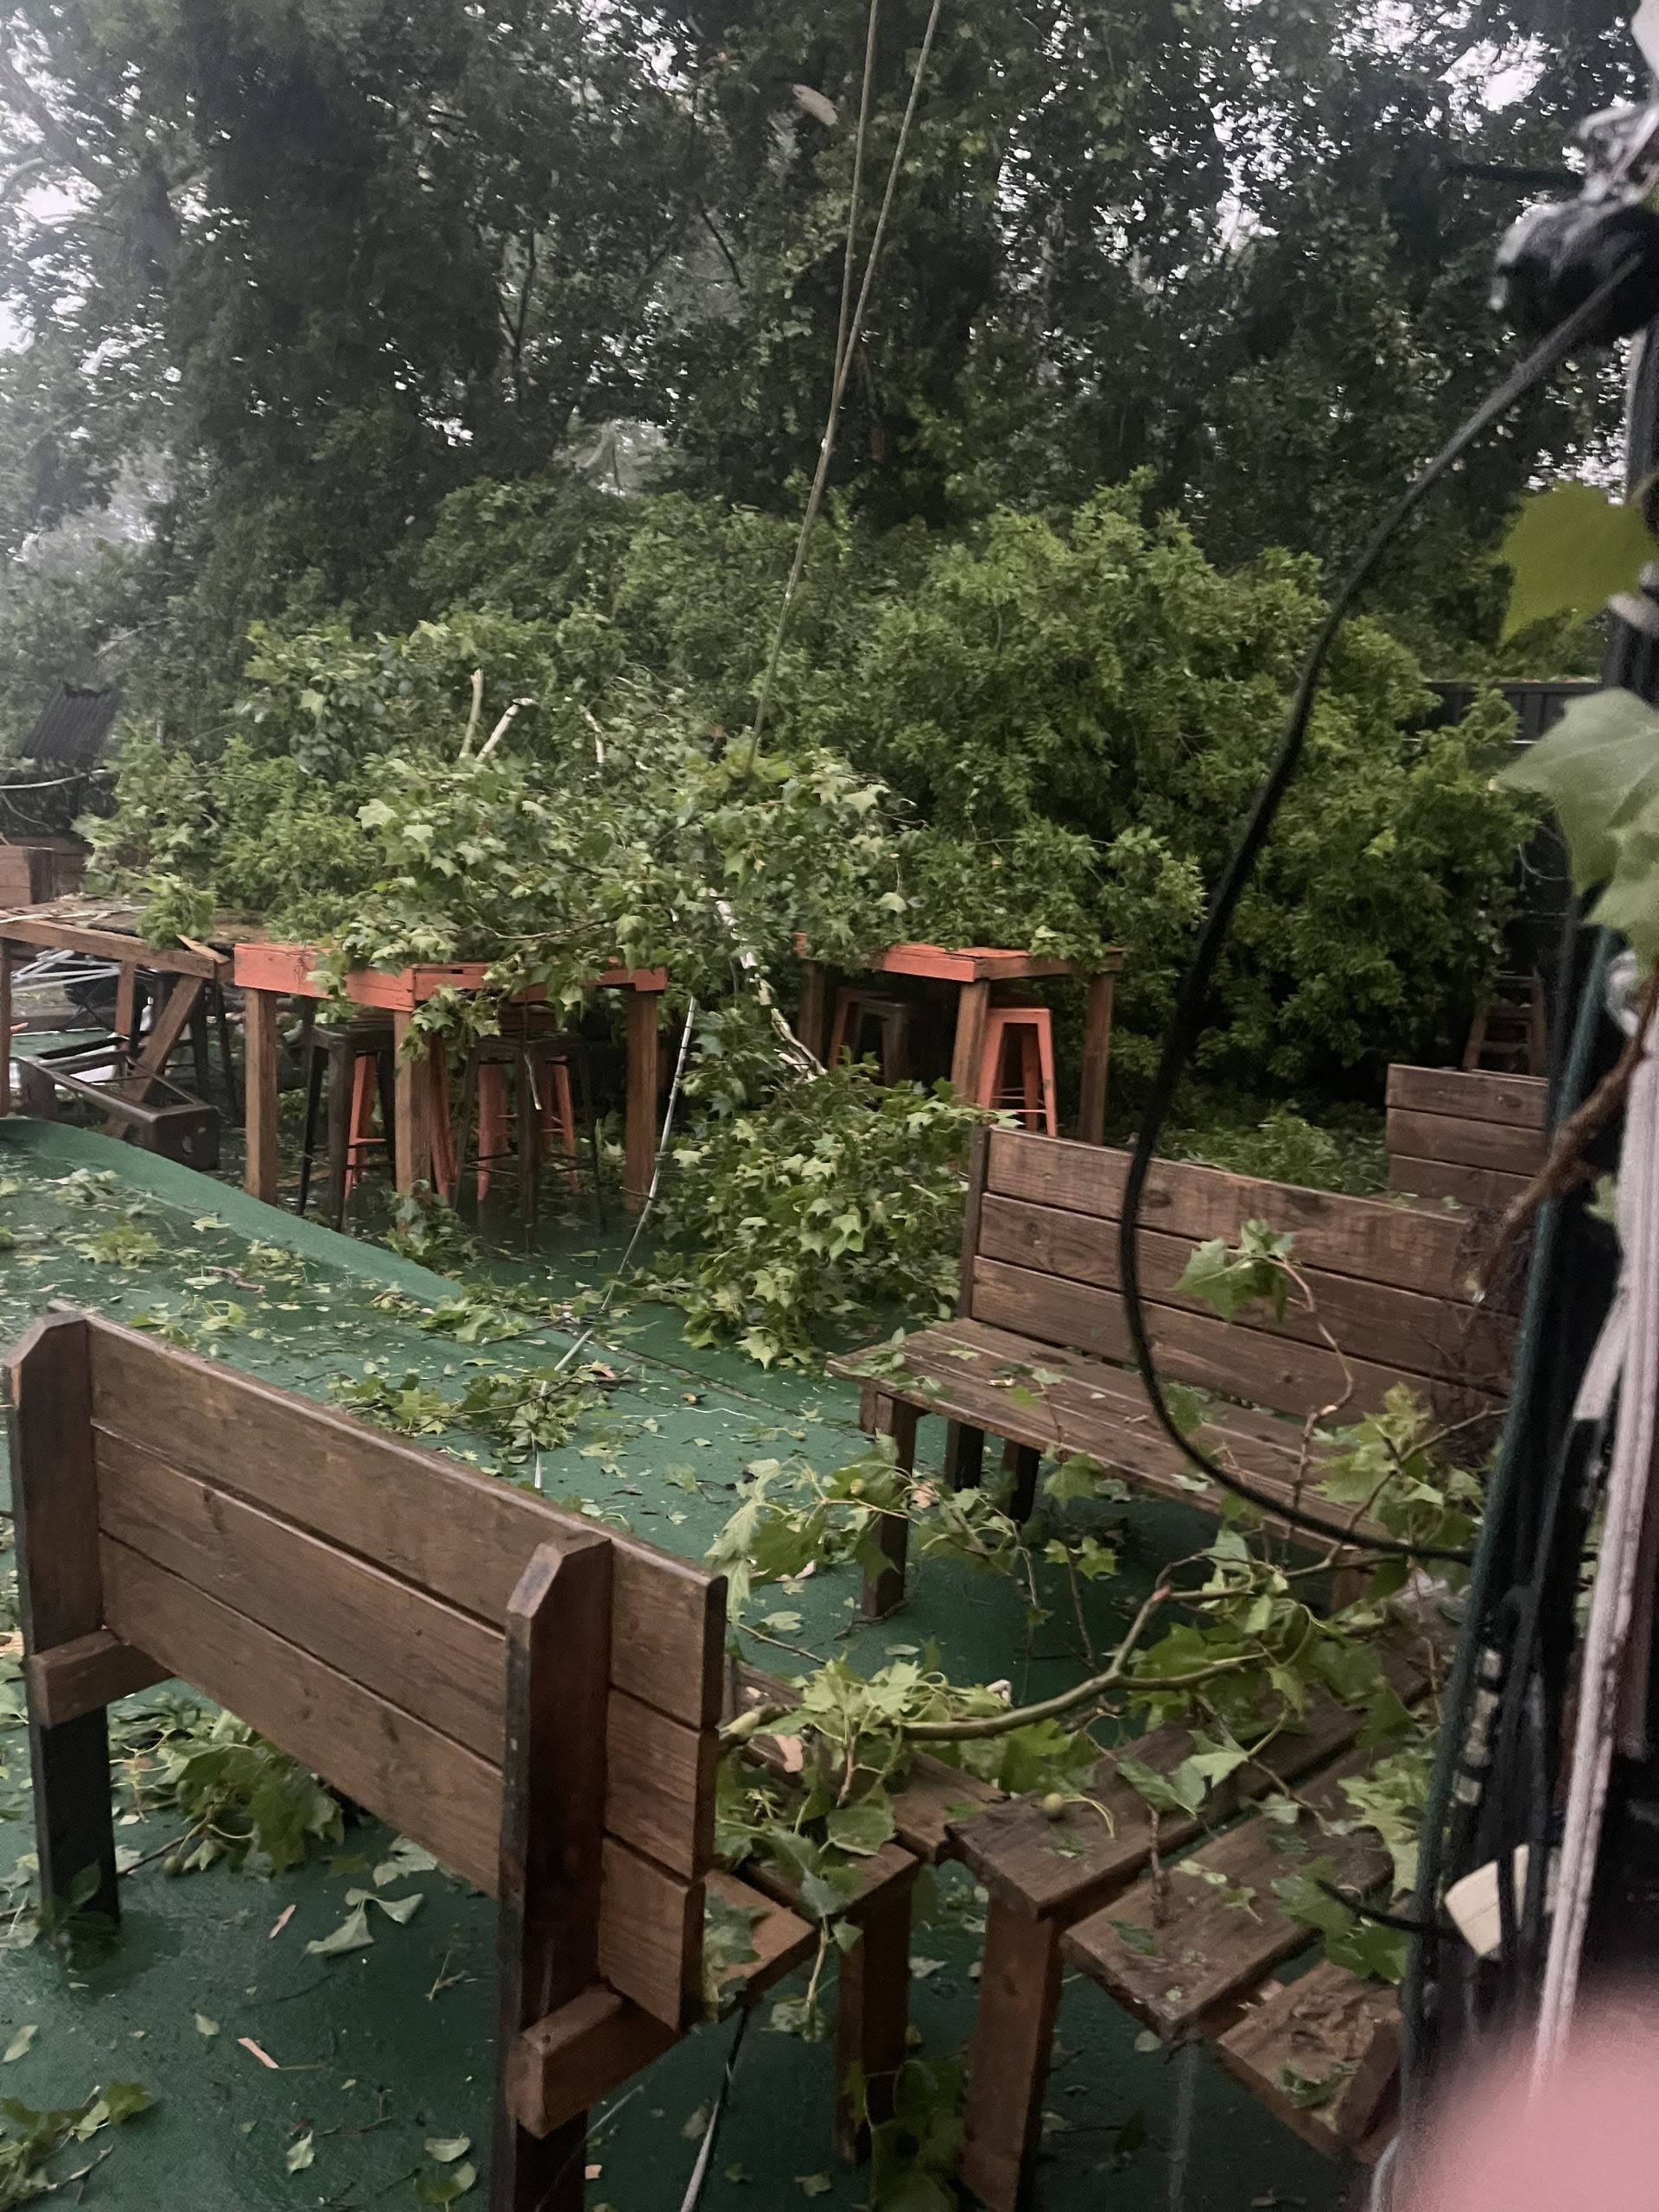 Houston restaurant owners scramble to get patrons to safety amid blistering derecho: 'It was horrible'